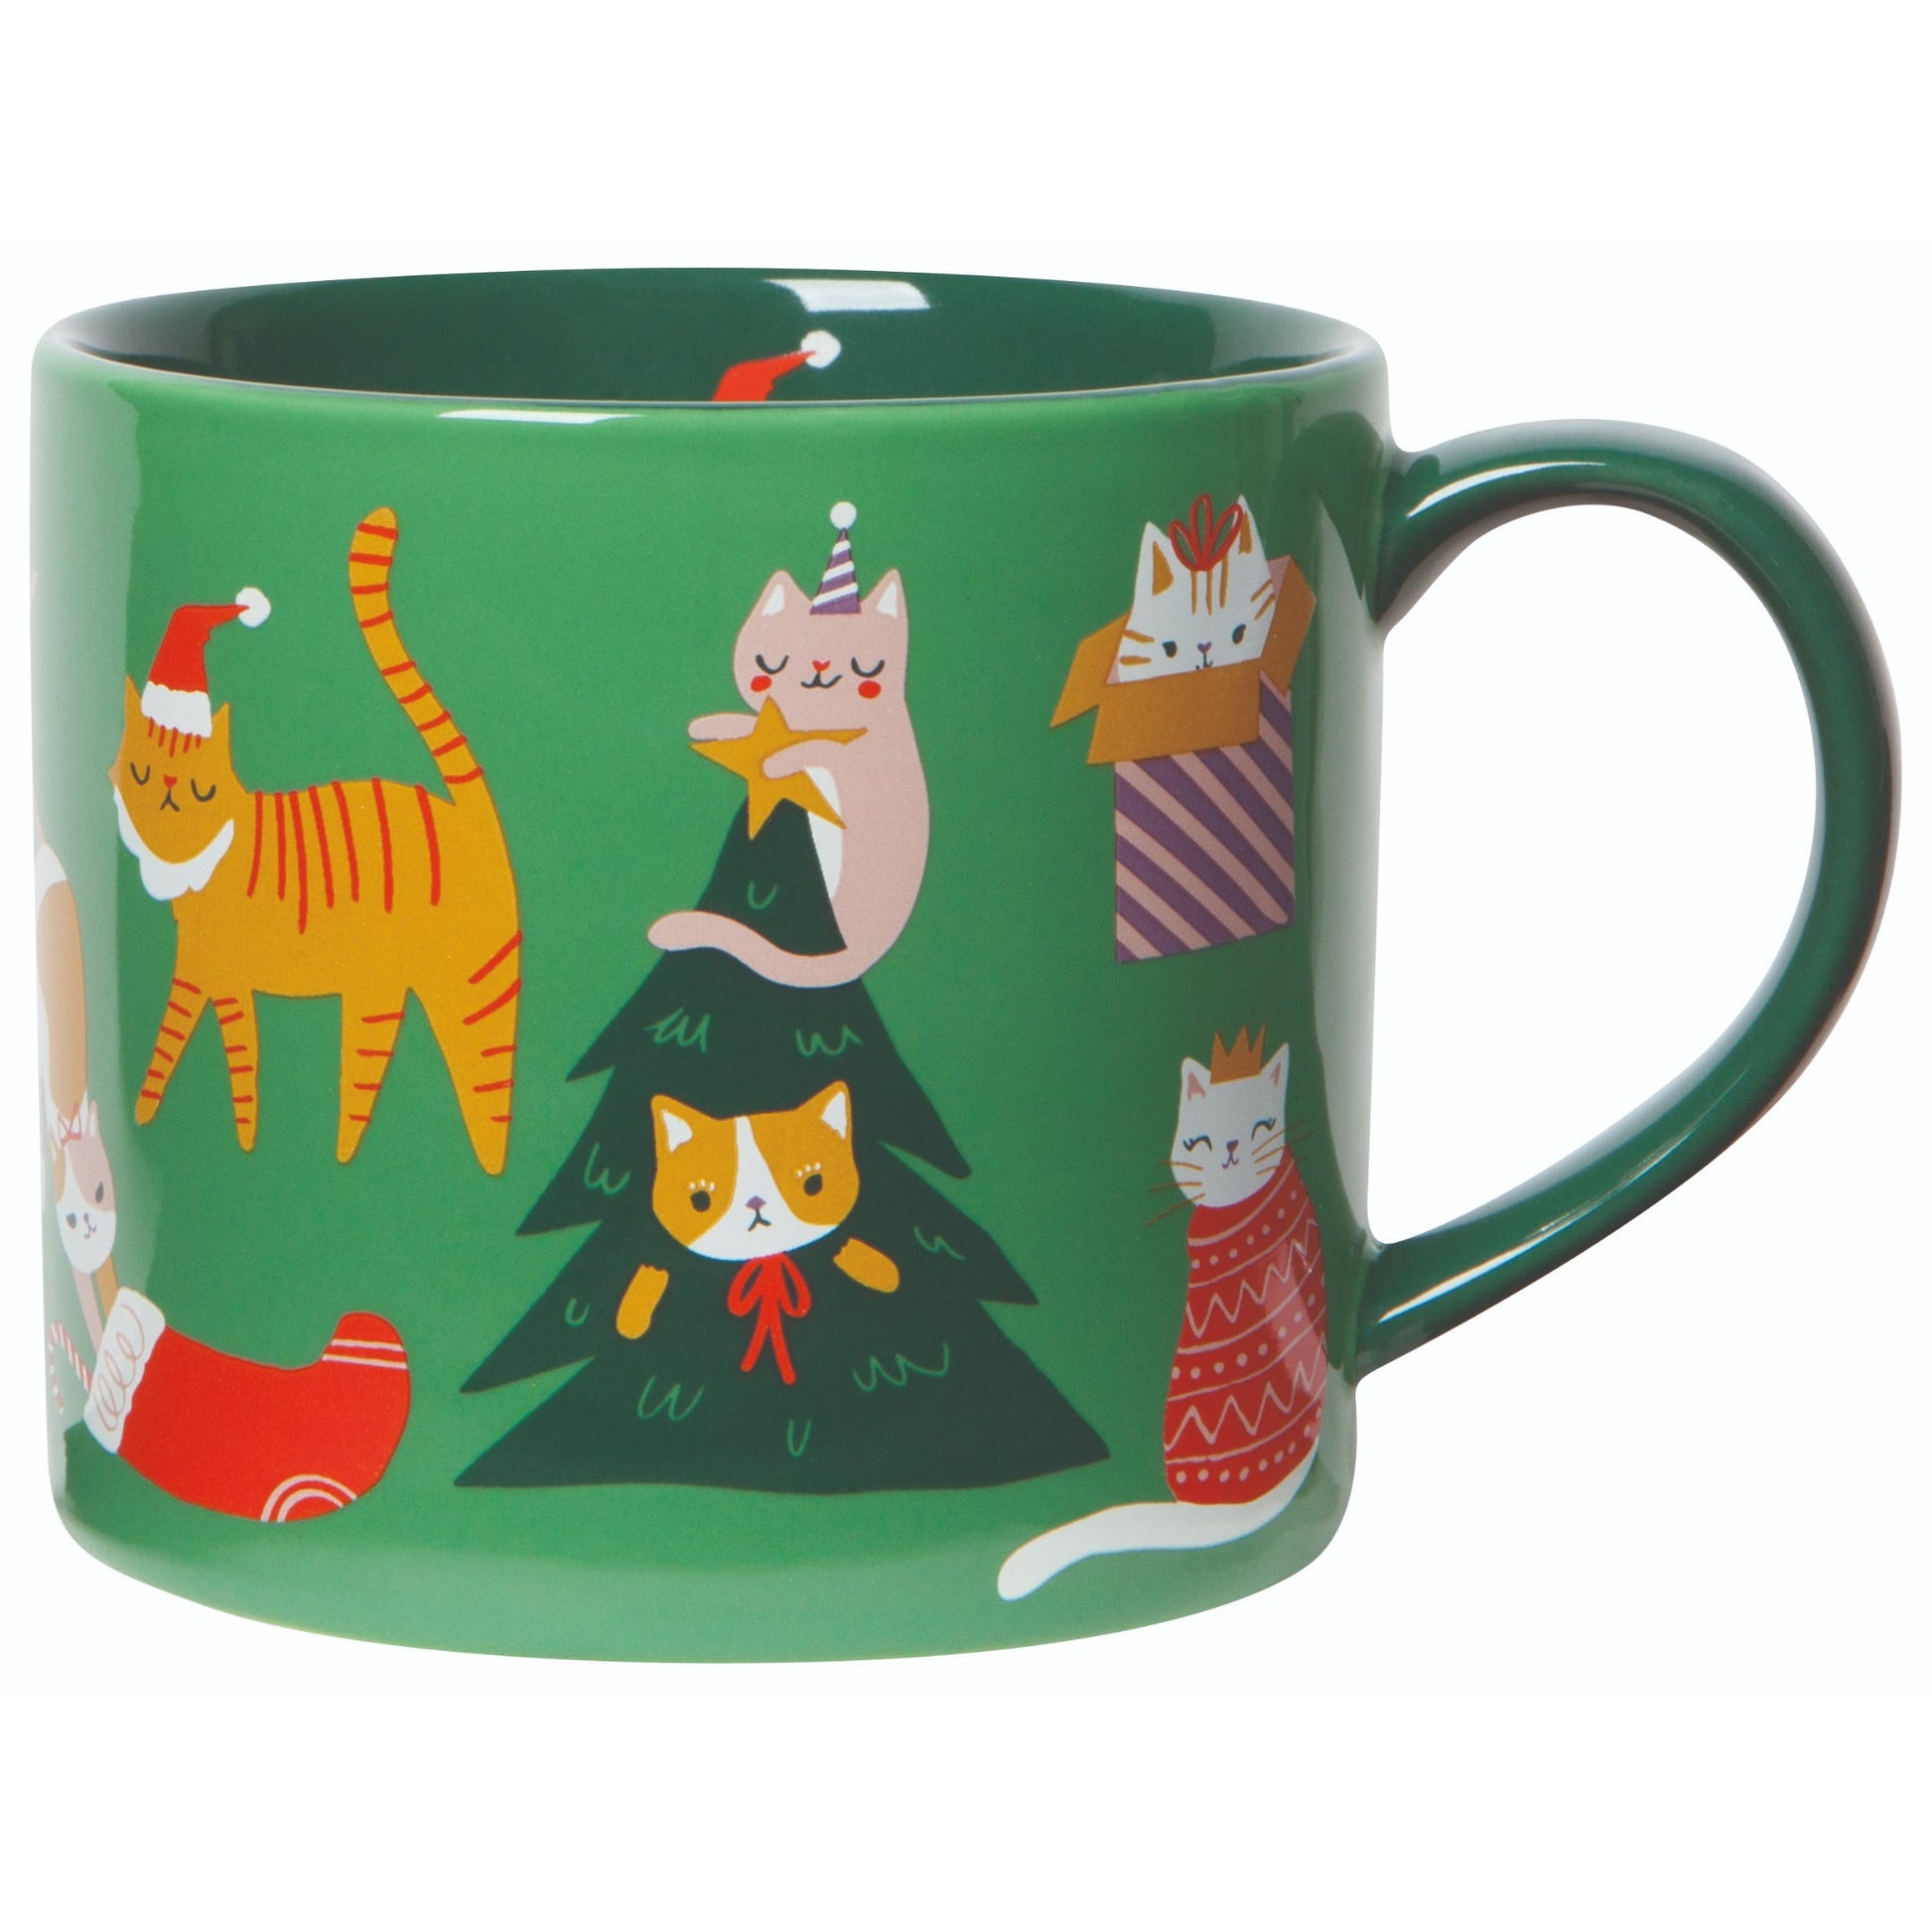 "Let It Meow": Mug in a Box - Tiny Tiger Gift Shop